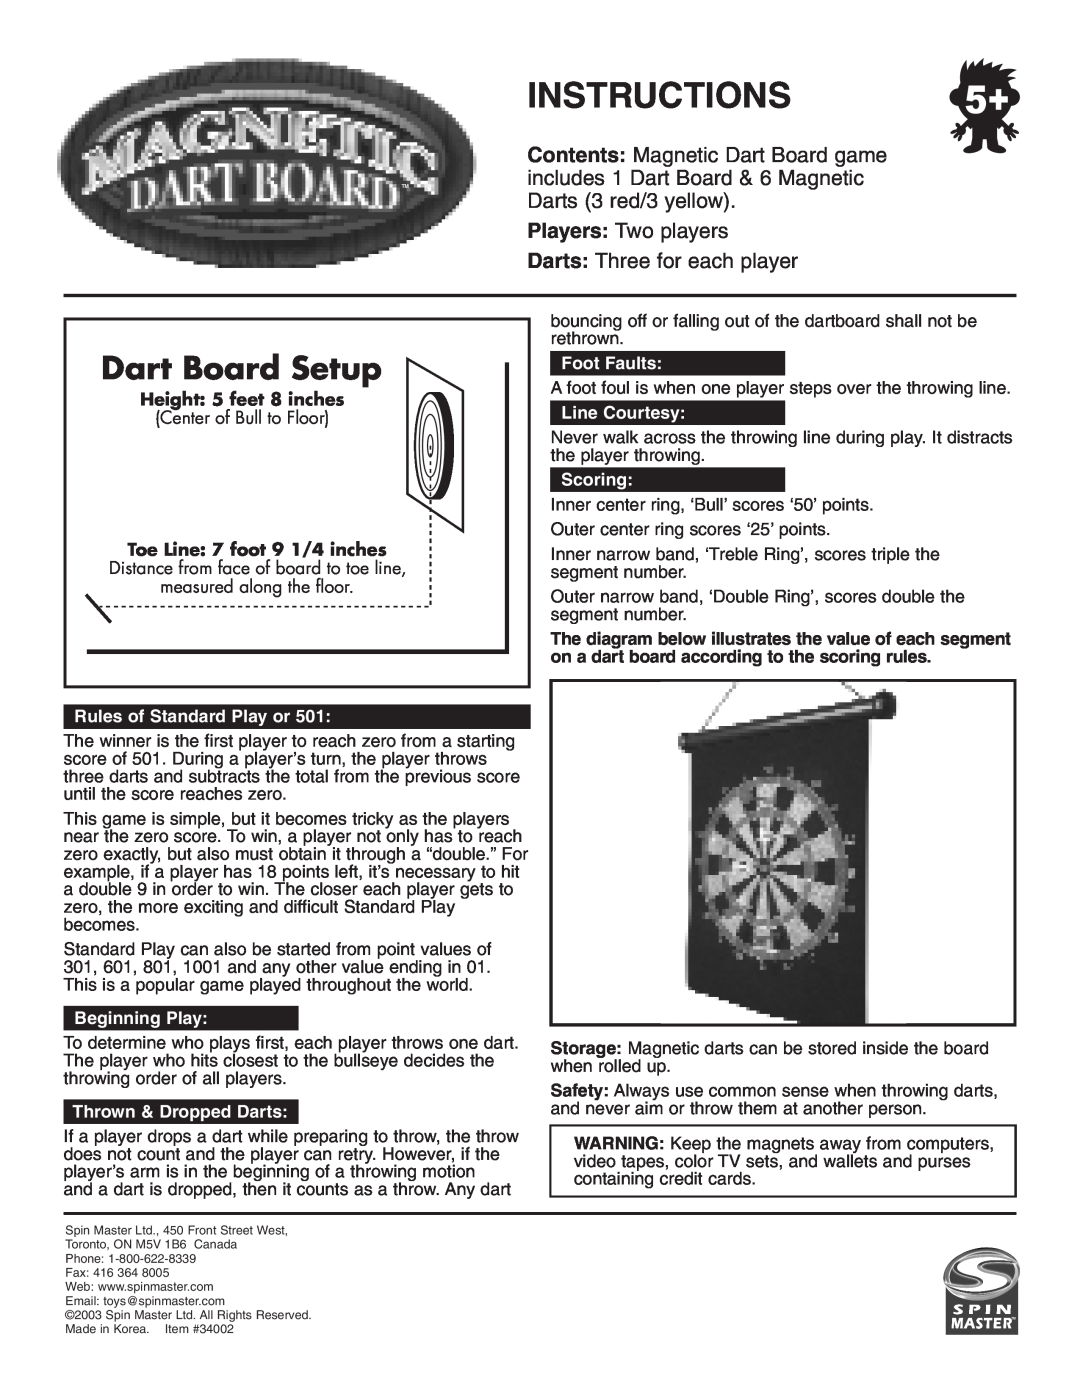 Spin Master 34002 manual Instructions, Dart Board Setup, Players Two players Darts Three for each player, Beginning Play 